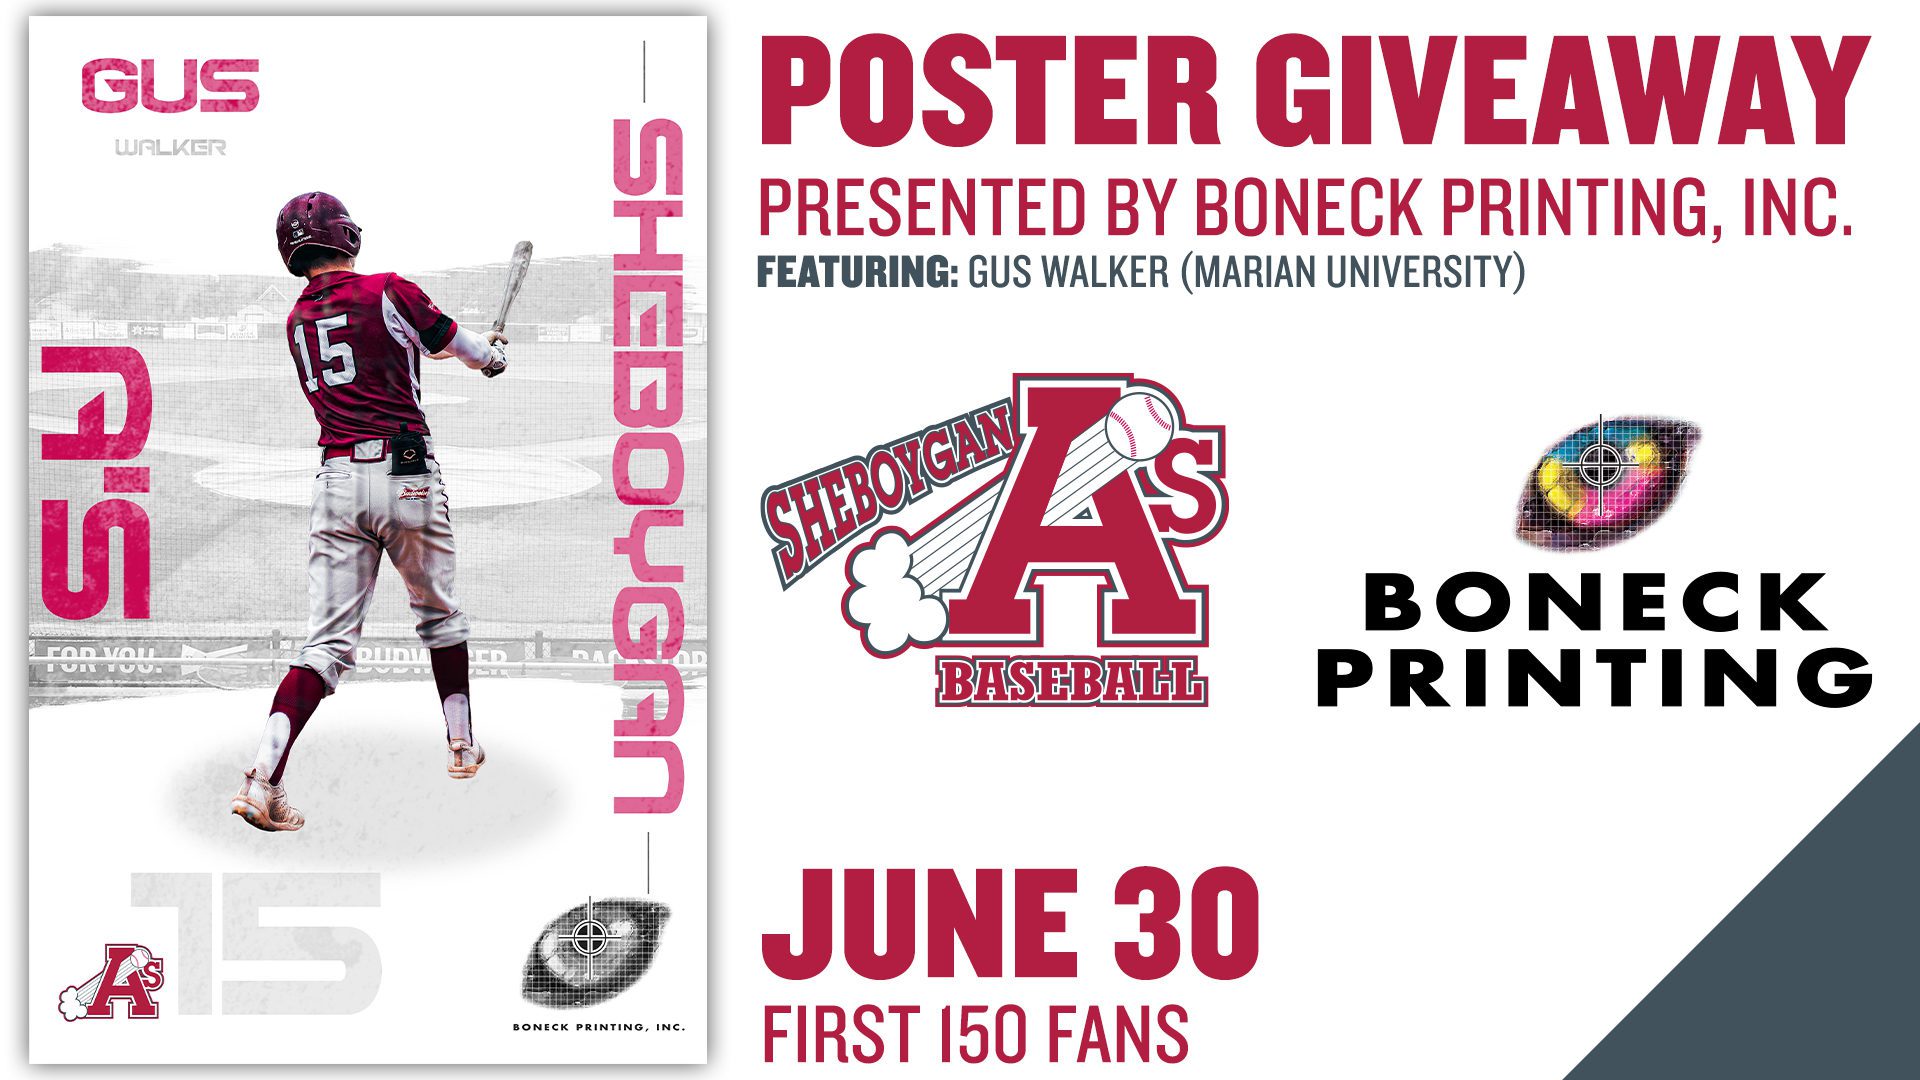 Poster Giveaway presented by Boneck Printing